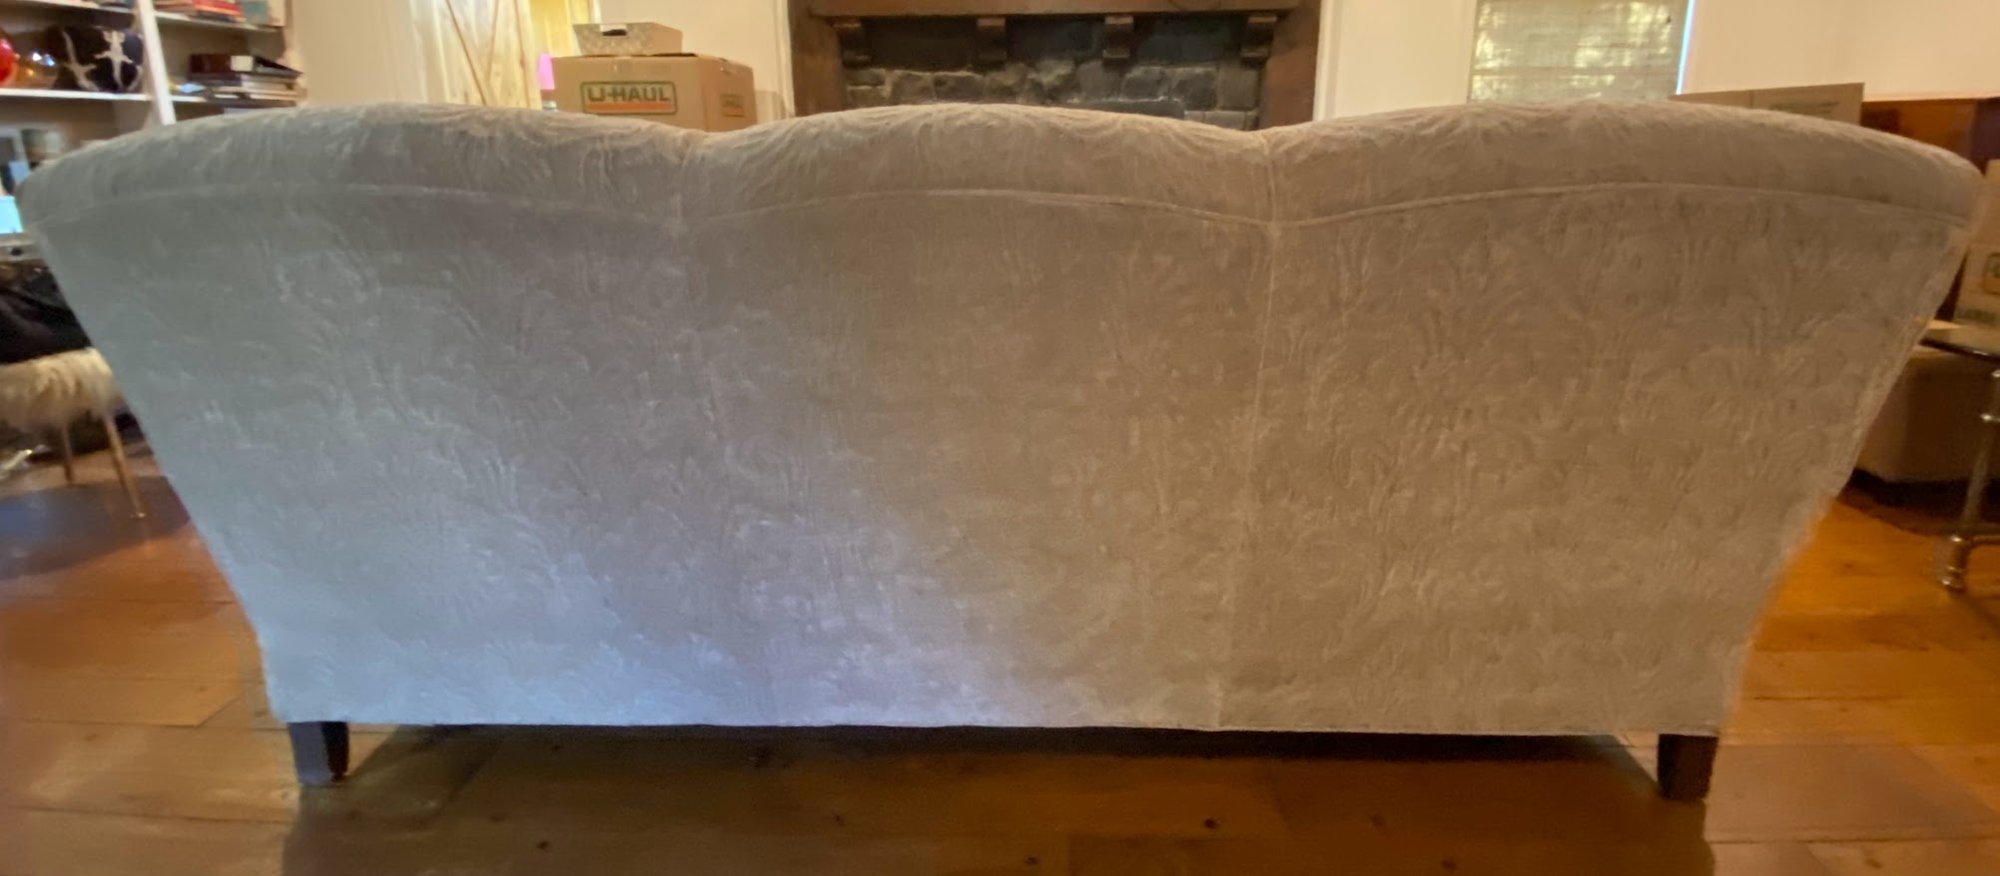 Arhaus Outerbanks Sofa In Chenille Damask #6688 | Auctionninja.com